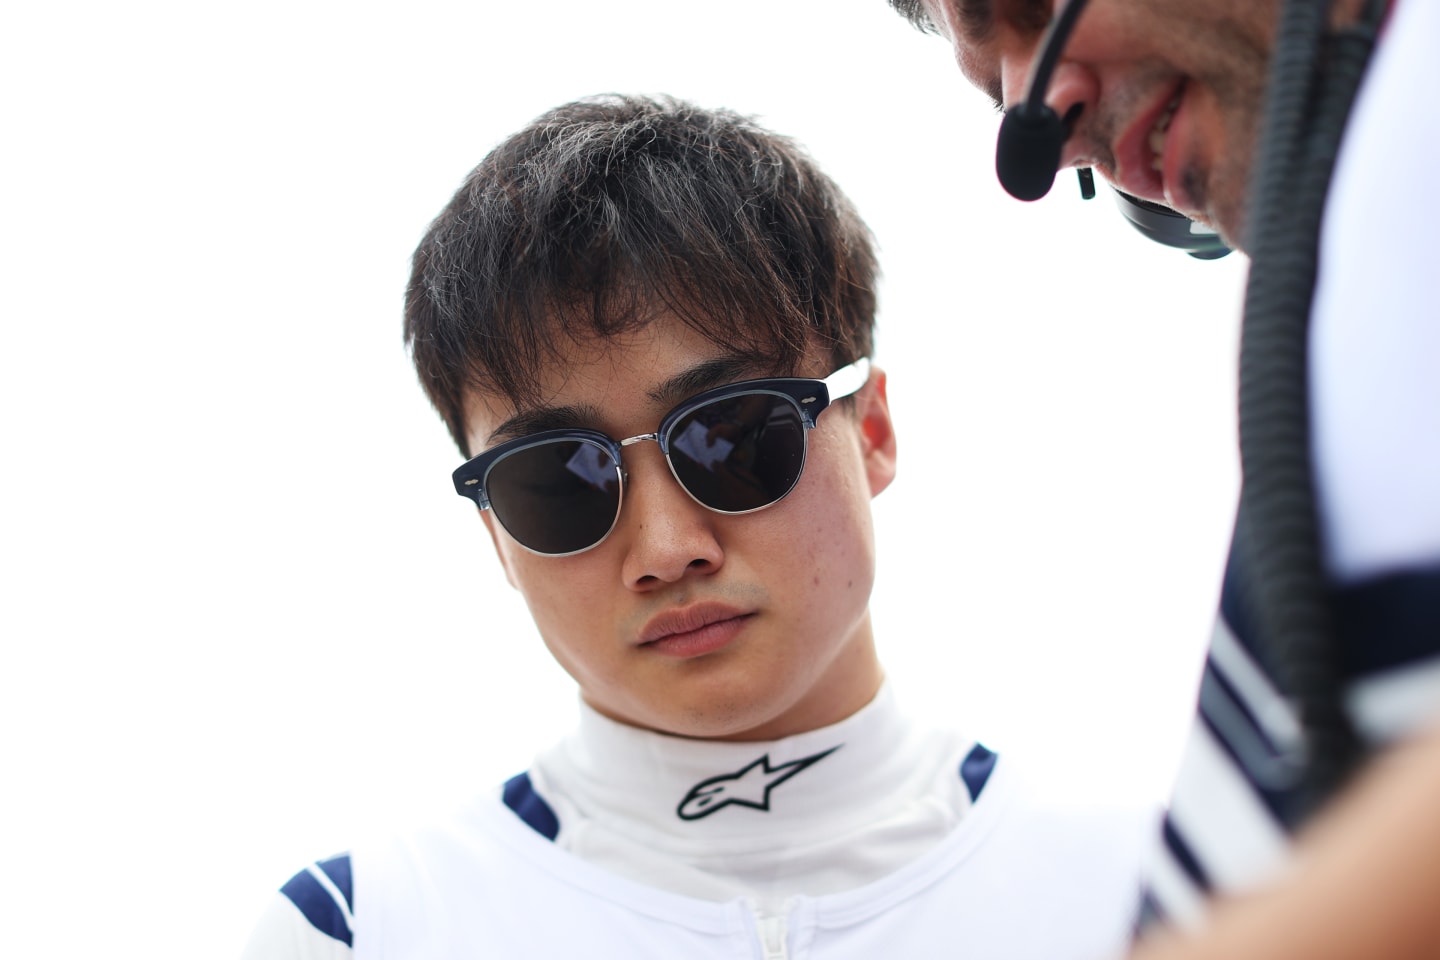 AUSTIN, TEXAS - OCTOBER 23: Yuki Tsunoda of Japan and Scuderia AlphaTauri prepares to drive on the grid during the F1 Grand Prix of USA at Circuit of The Americas on October 23, 2022 in Austin, Texas. (Photo by Peter Fox/Getty Images)